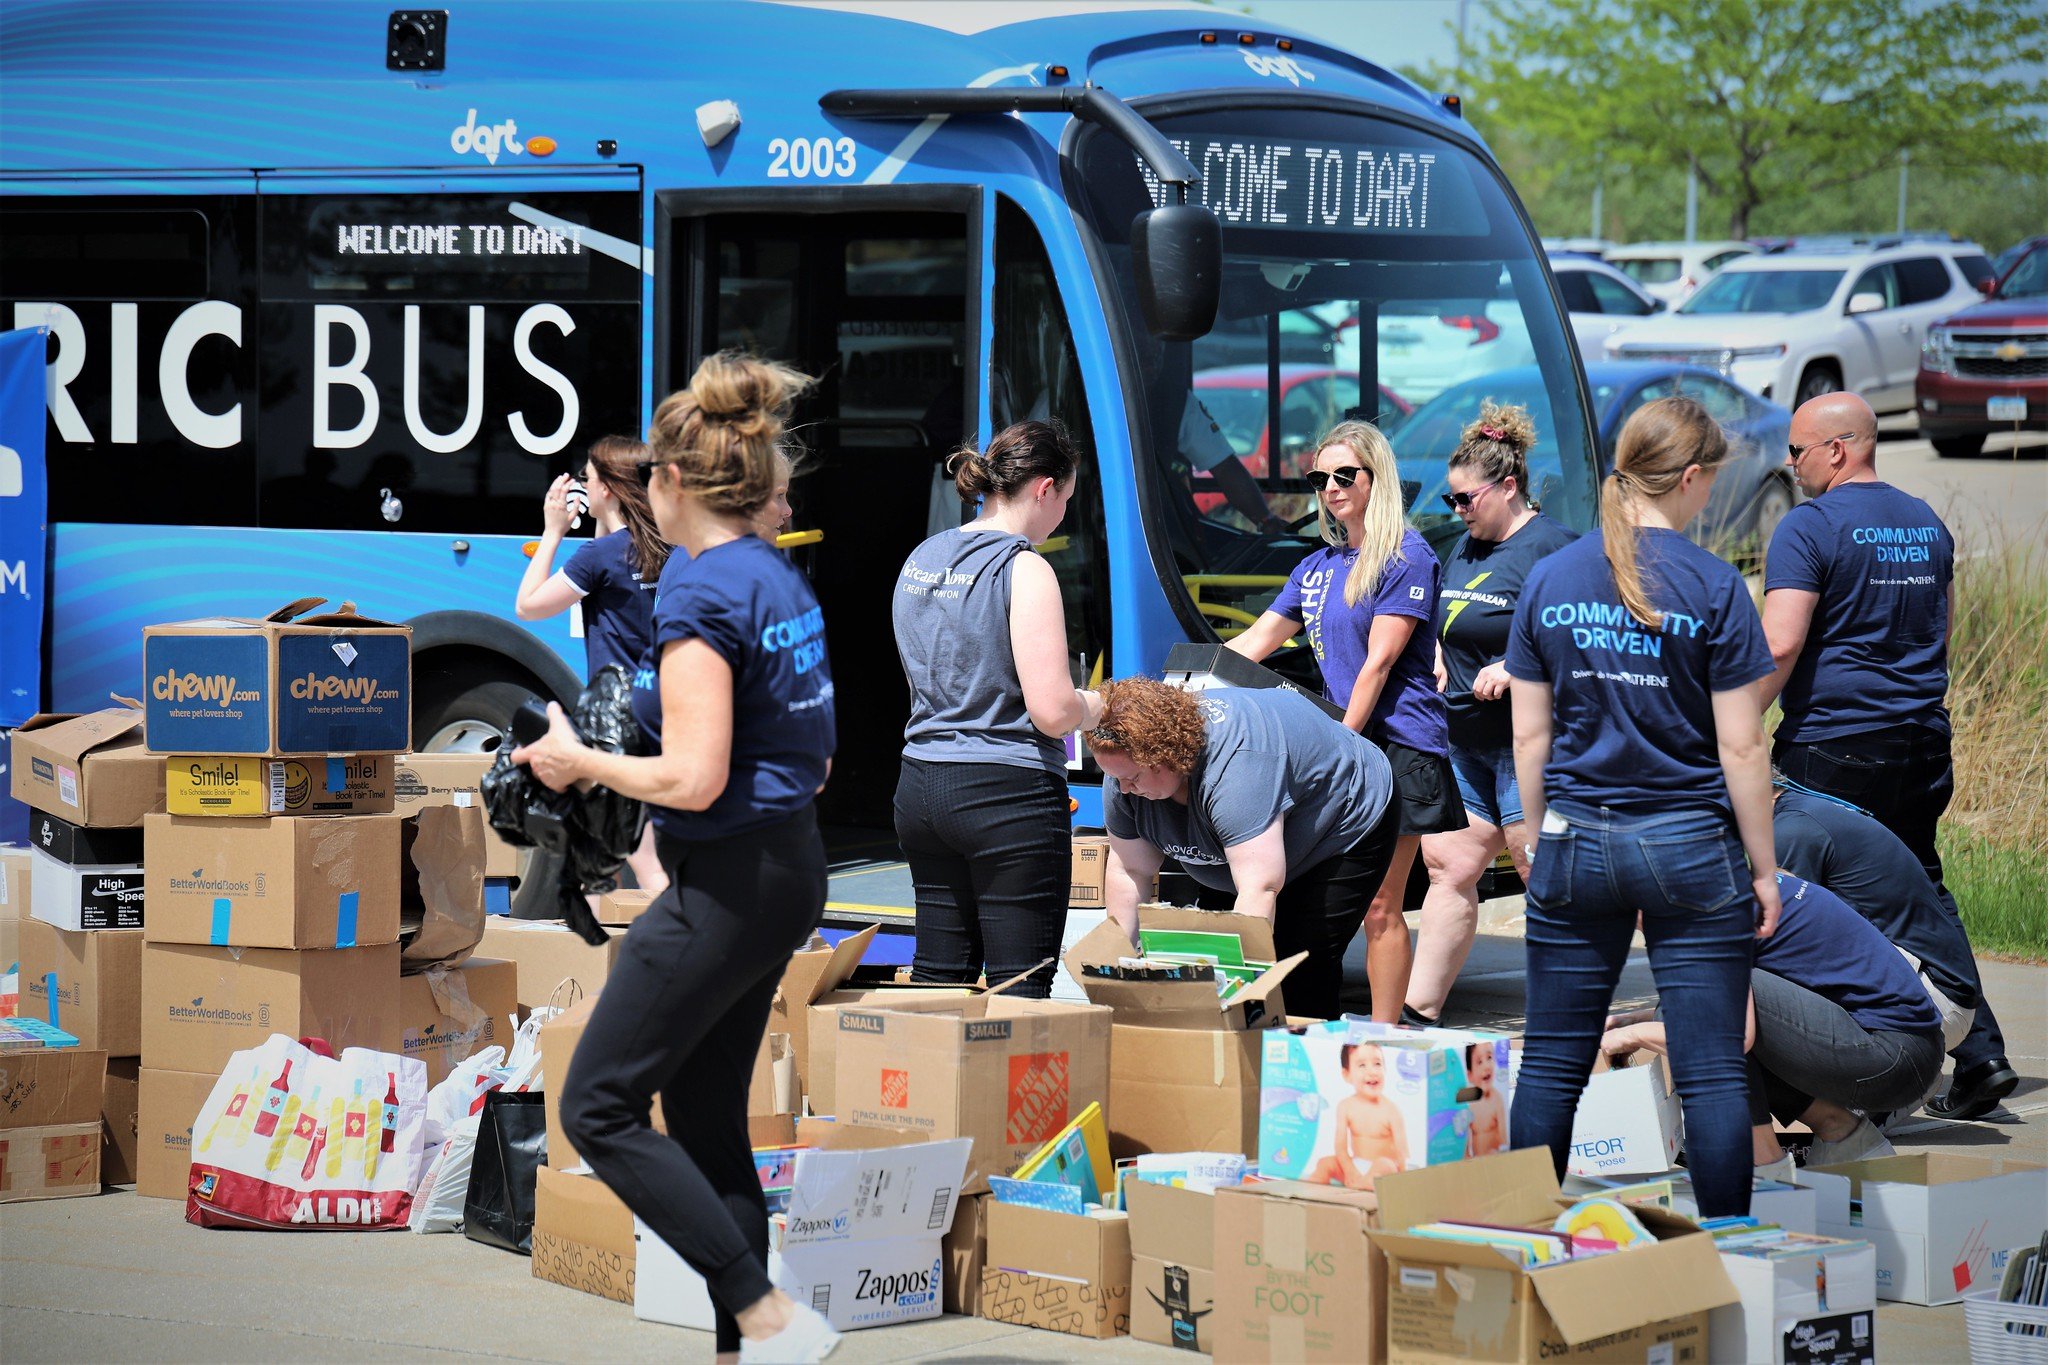 Stuff the Bus and Its Impact on Our Community